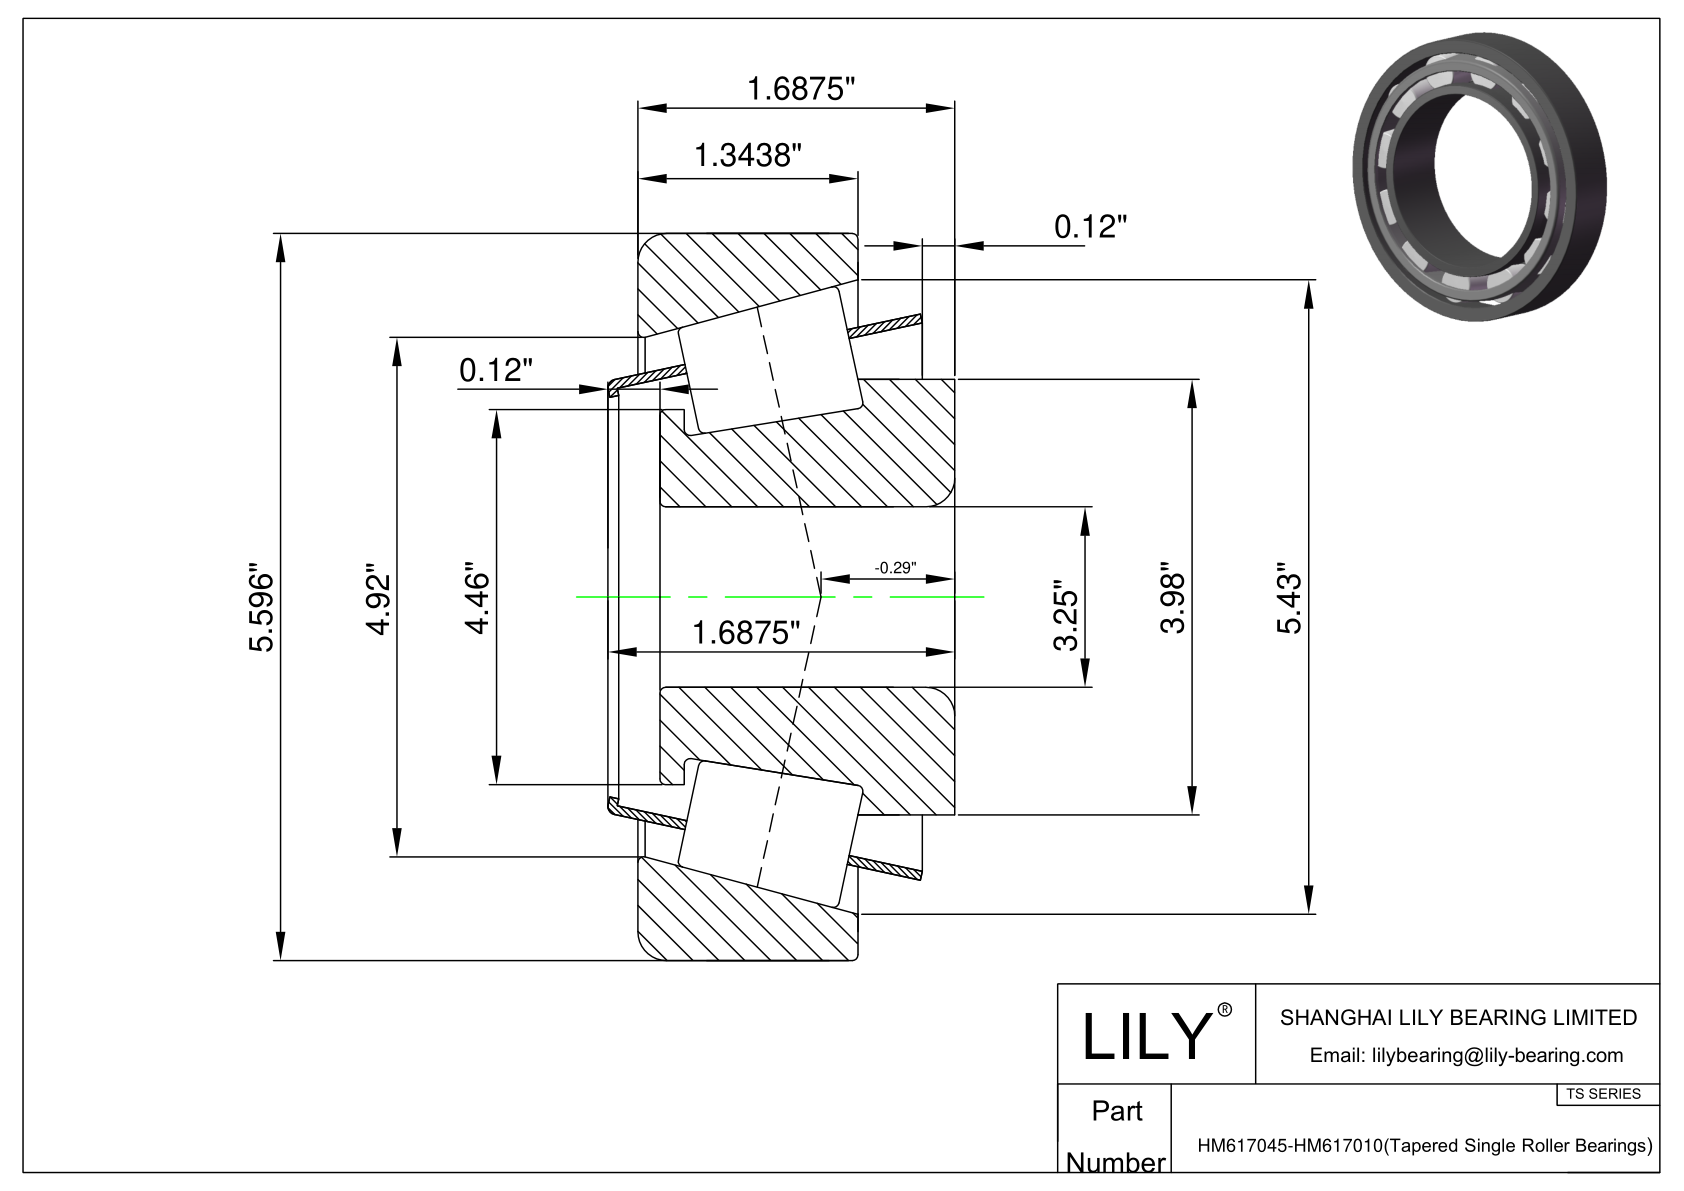 HM617045-HM617010 TS (Tapered Single Roller Bearings) (Imperial) cad drawing